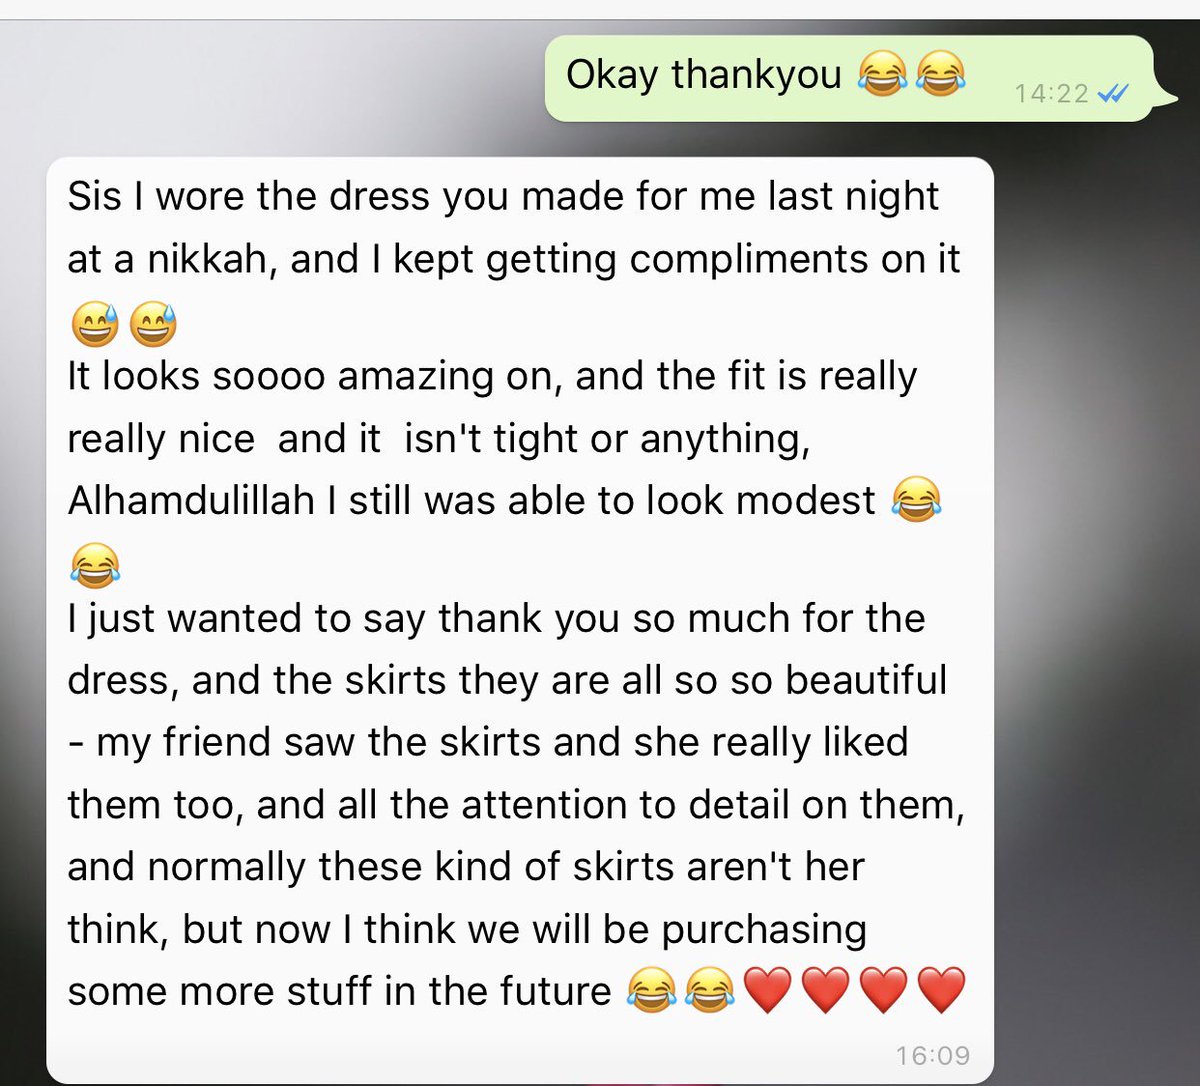 She’s been the easiest customer to work with and she noticed and appreciated all the little details too  so sweet May Allah bless her